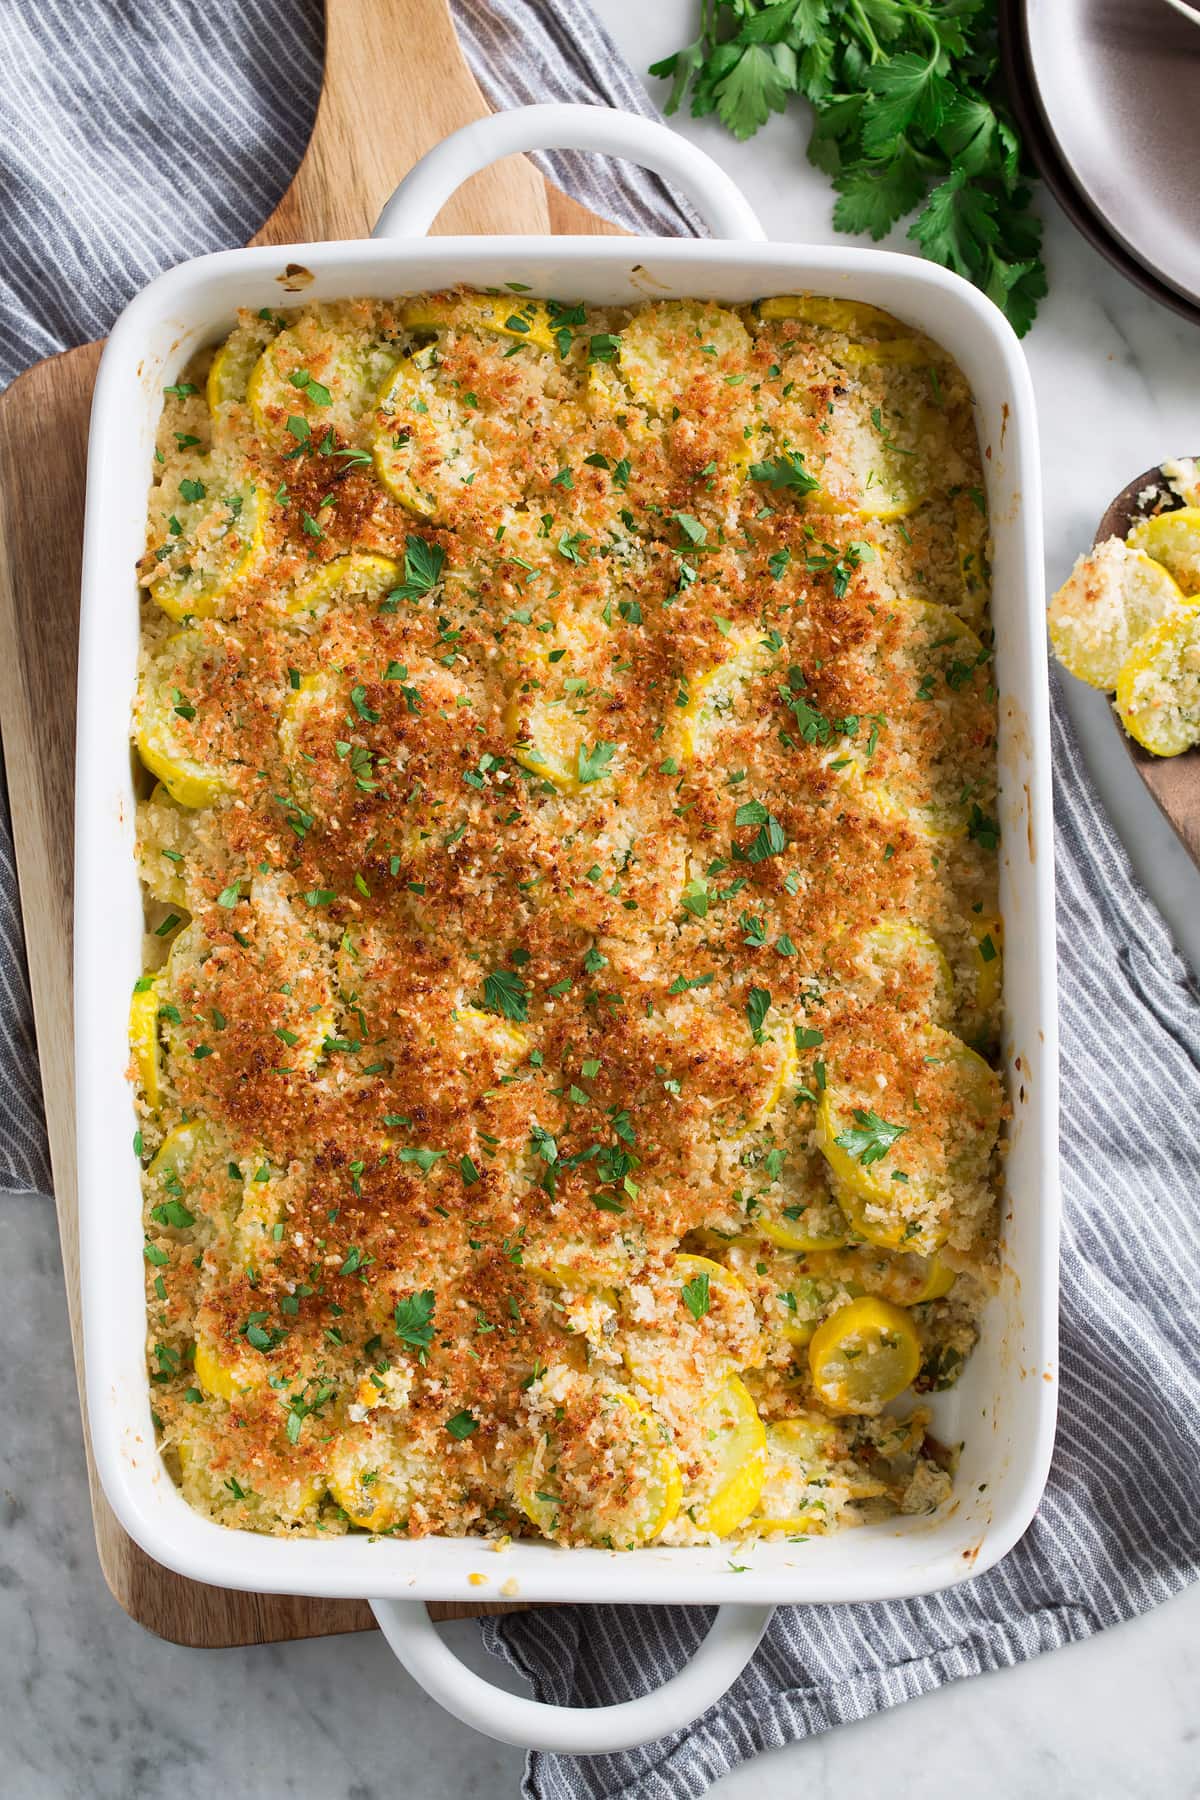 Yellow squash casserole in a white baking dish with one scoop removed to show filling.